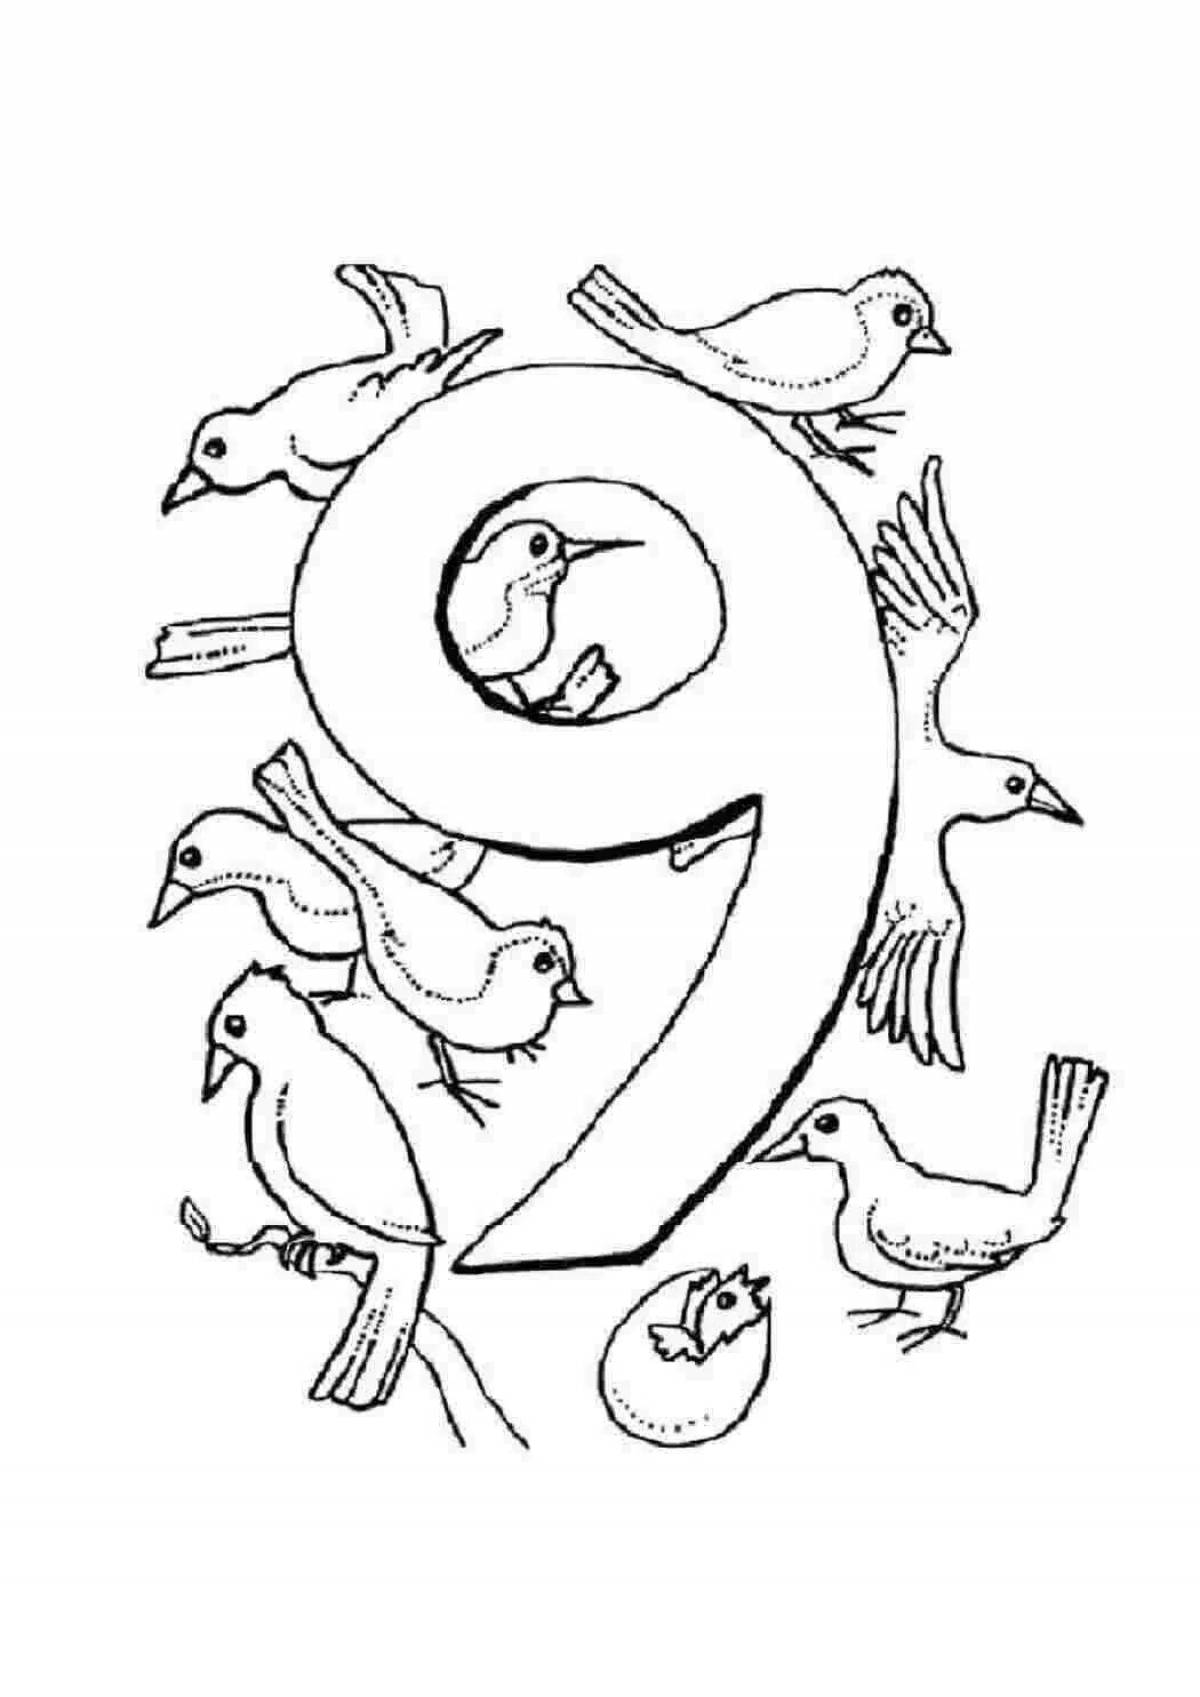 Fun coloring pages with animal shaped page numbers